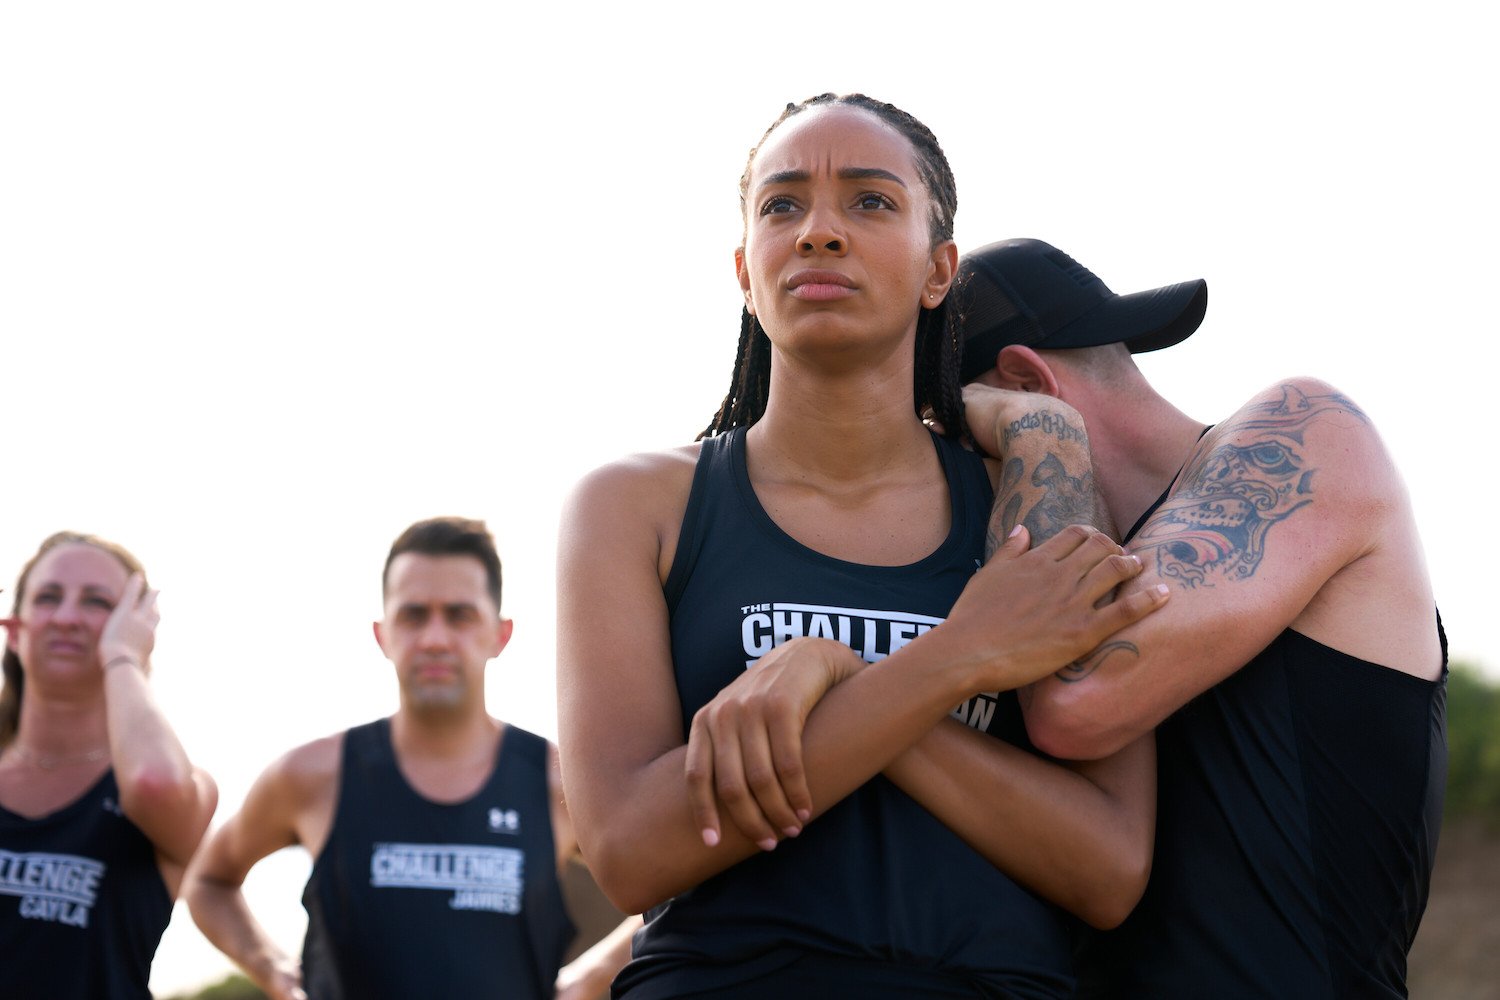 Shan Smith from 'The Challenge: USA' cast looking stern as another cast member holds on to her shoulders